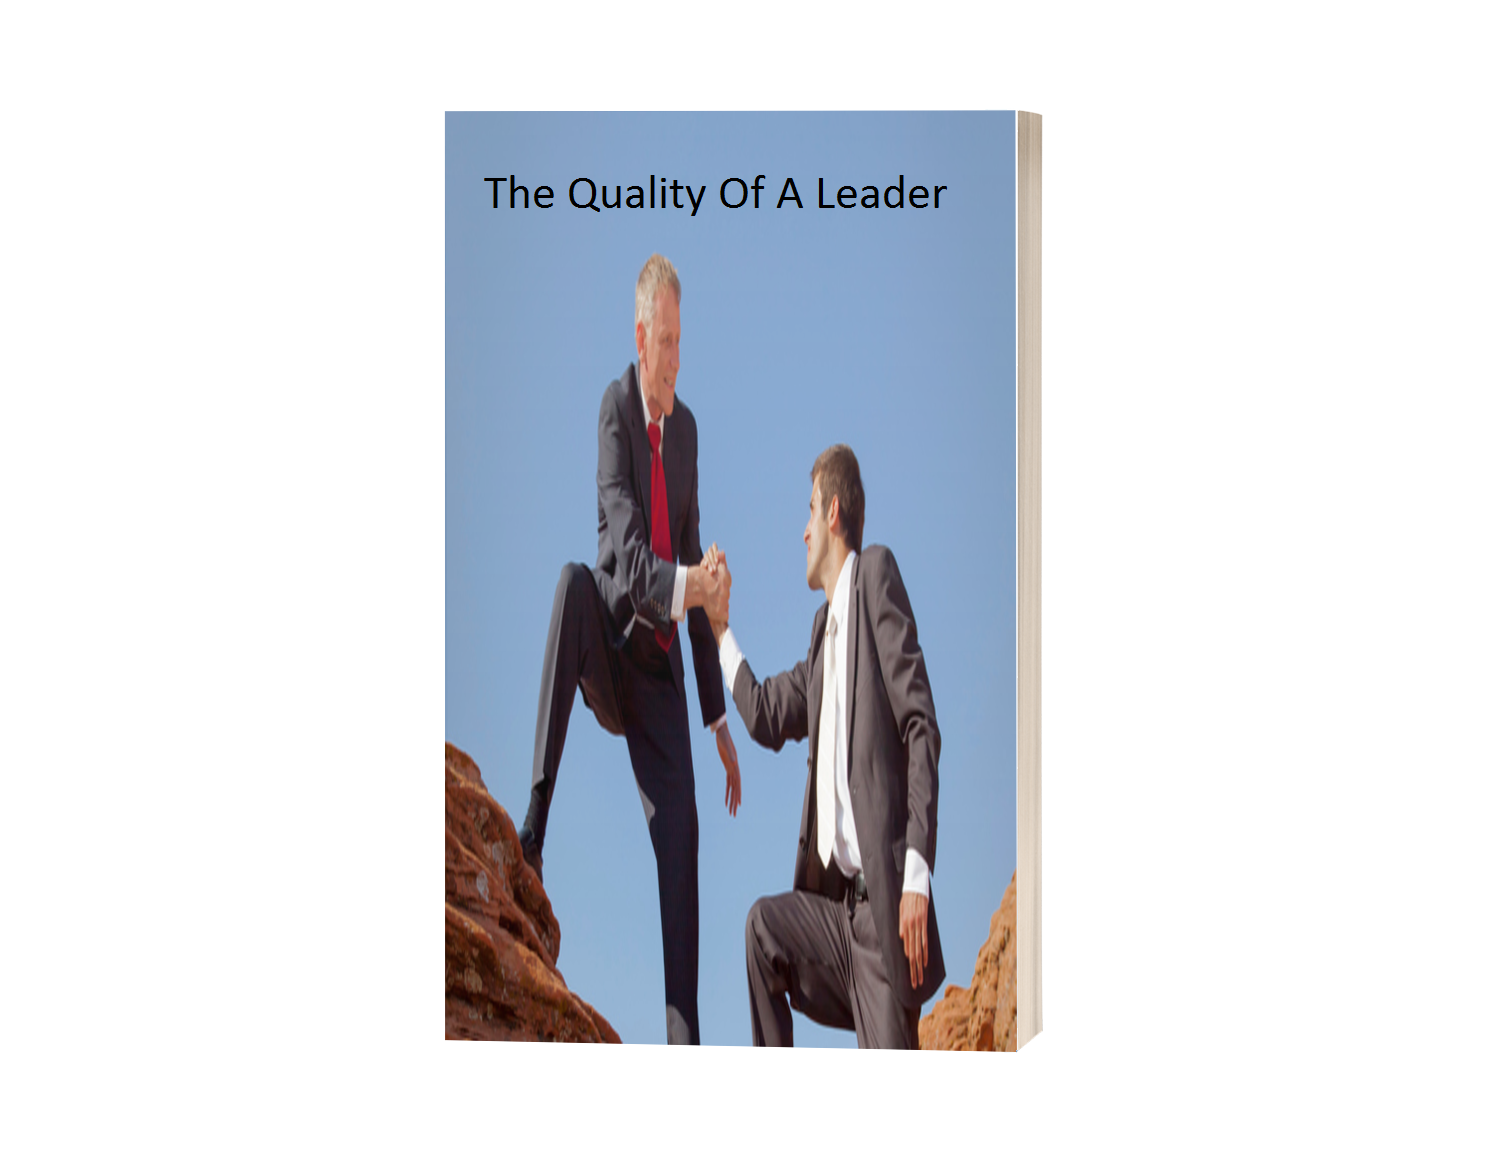 The Quality of a Leader